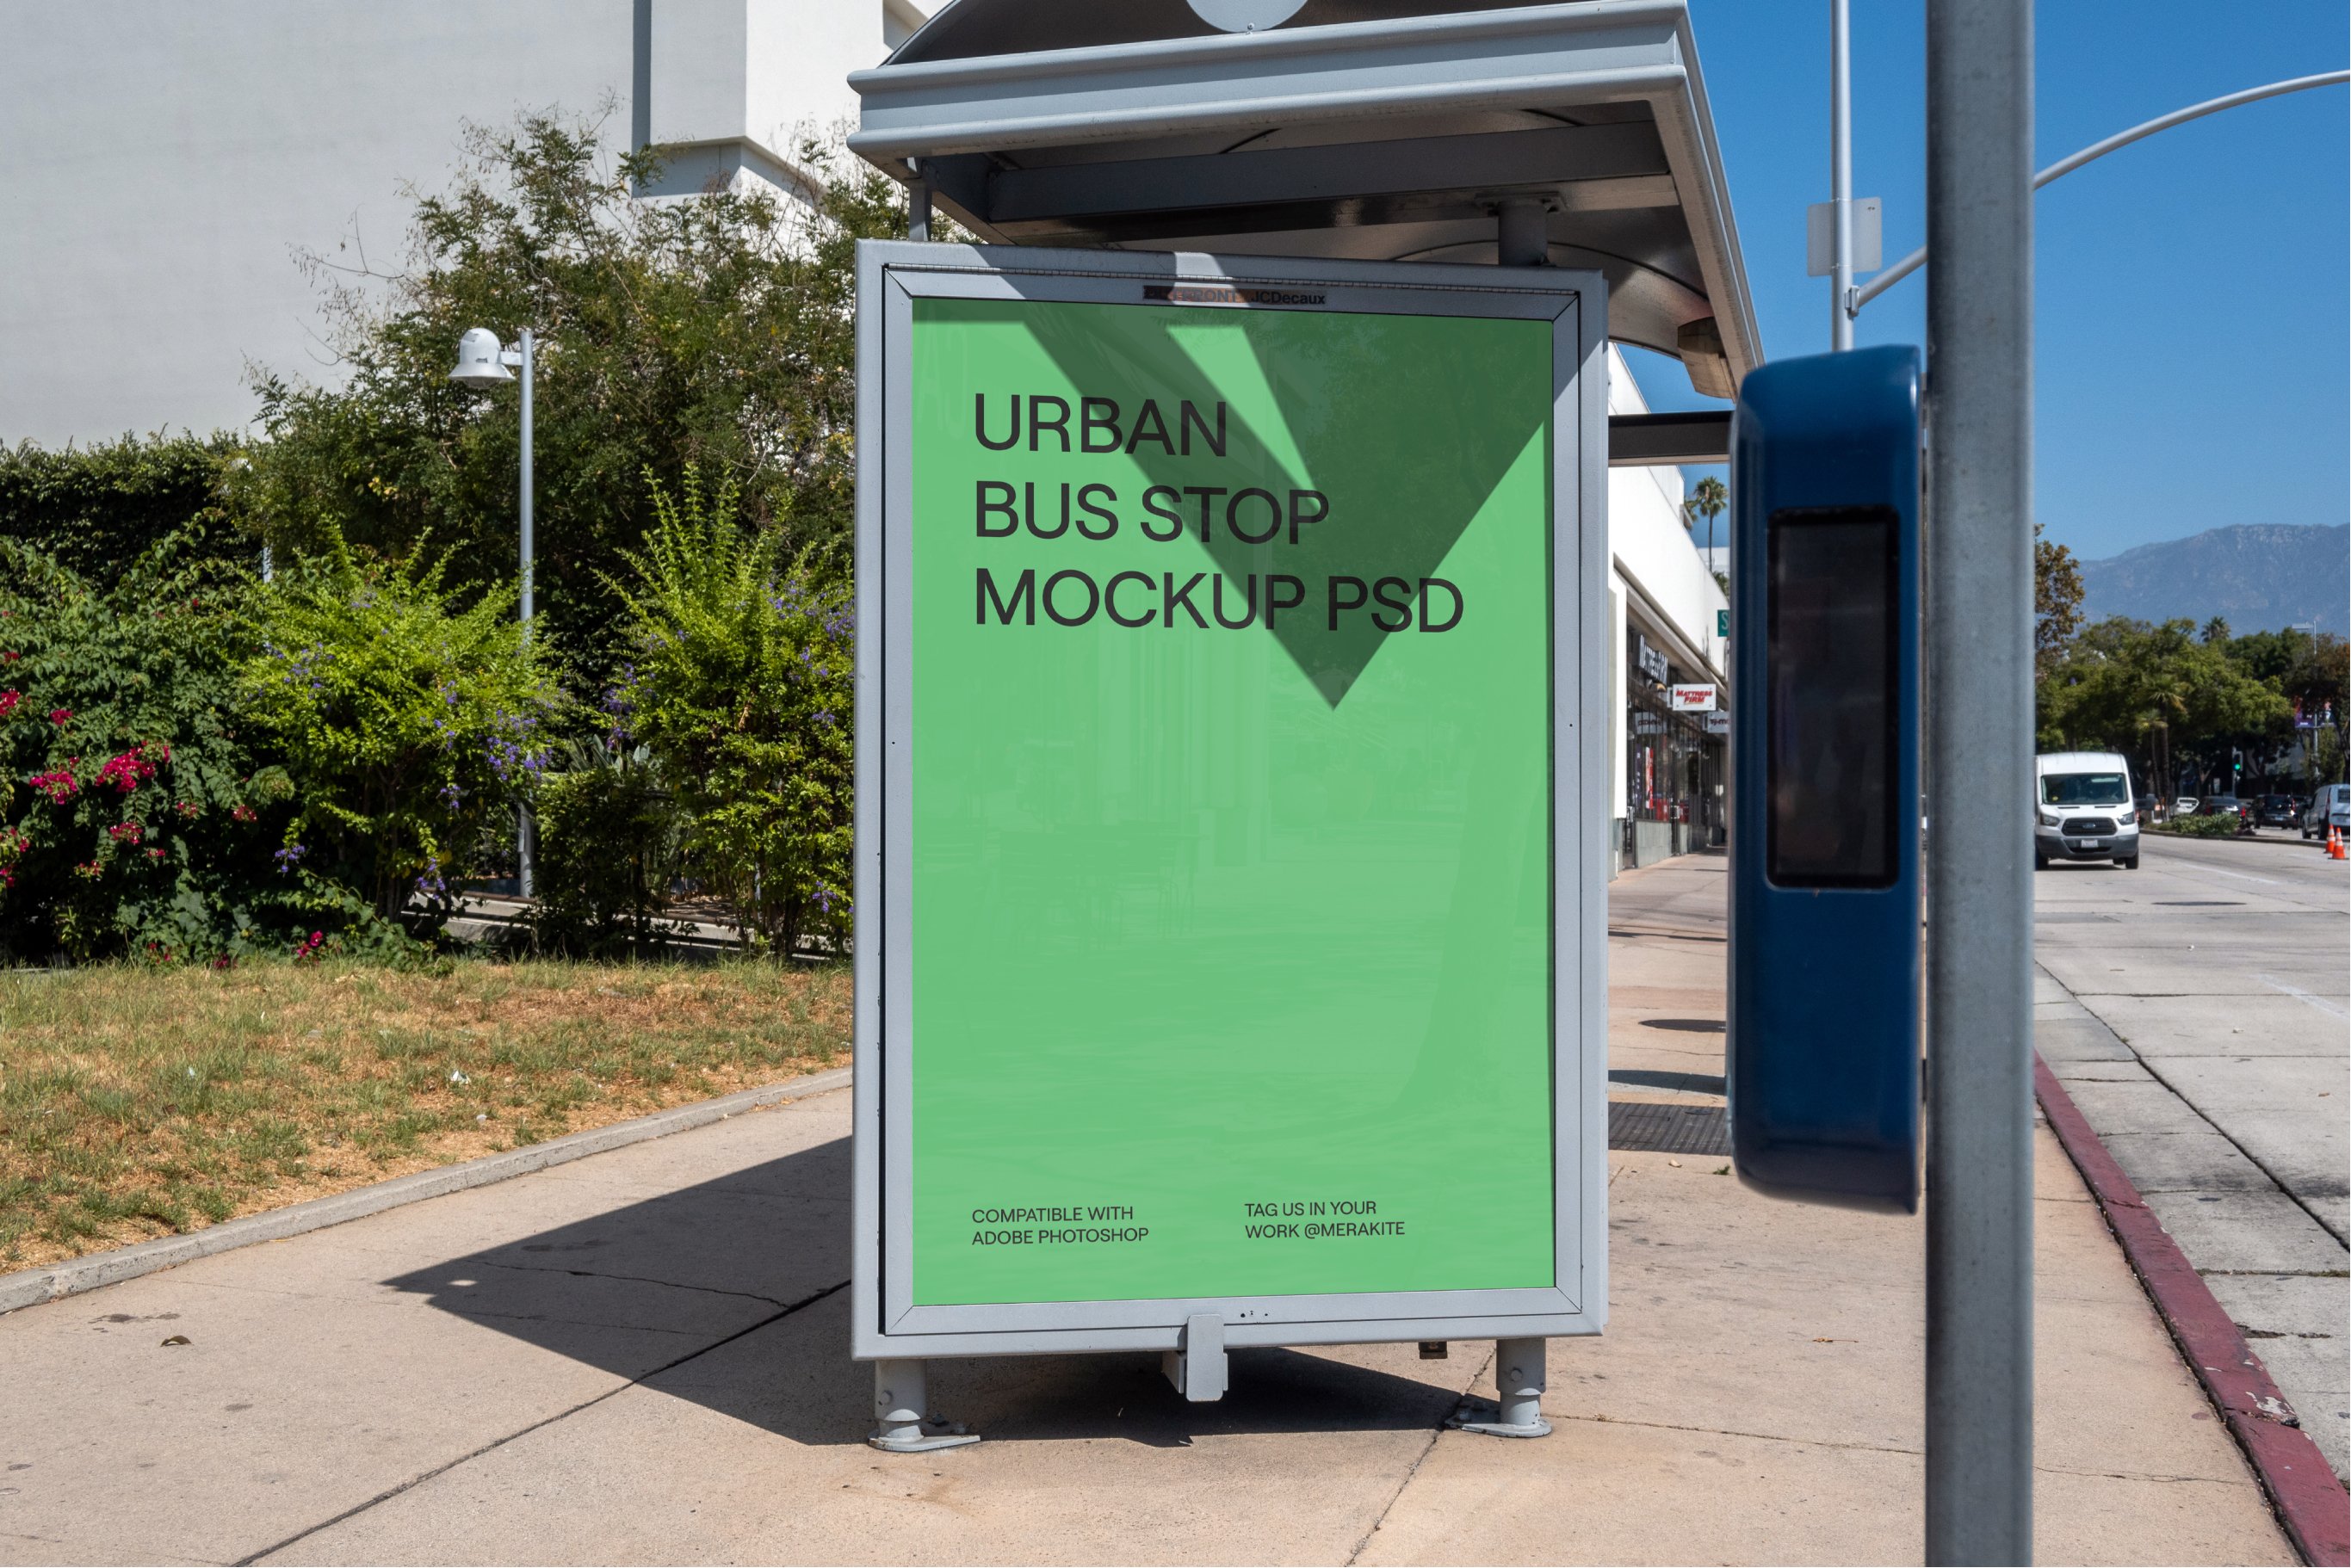 Urban Downtown Bus Stop Mockup PSD cover image.